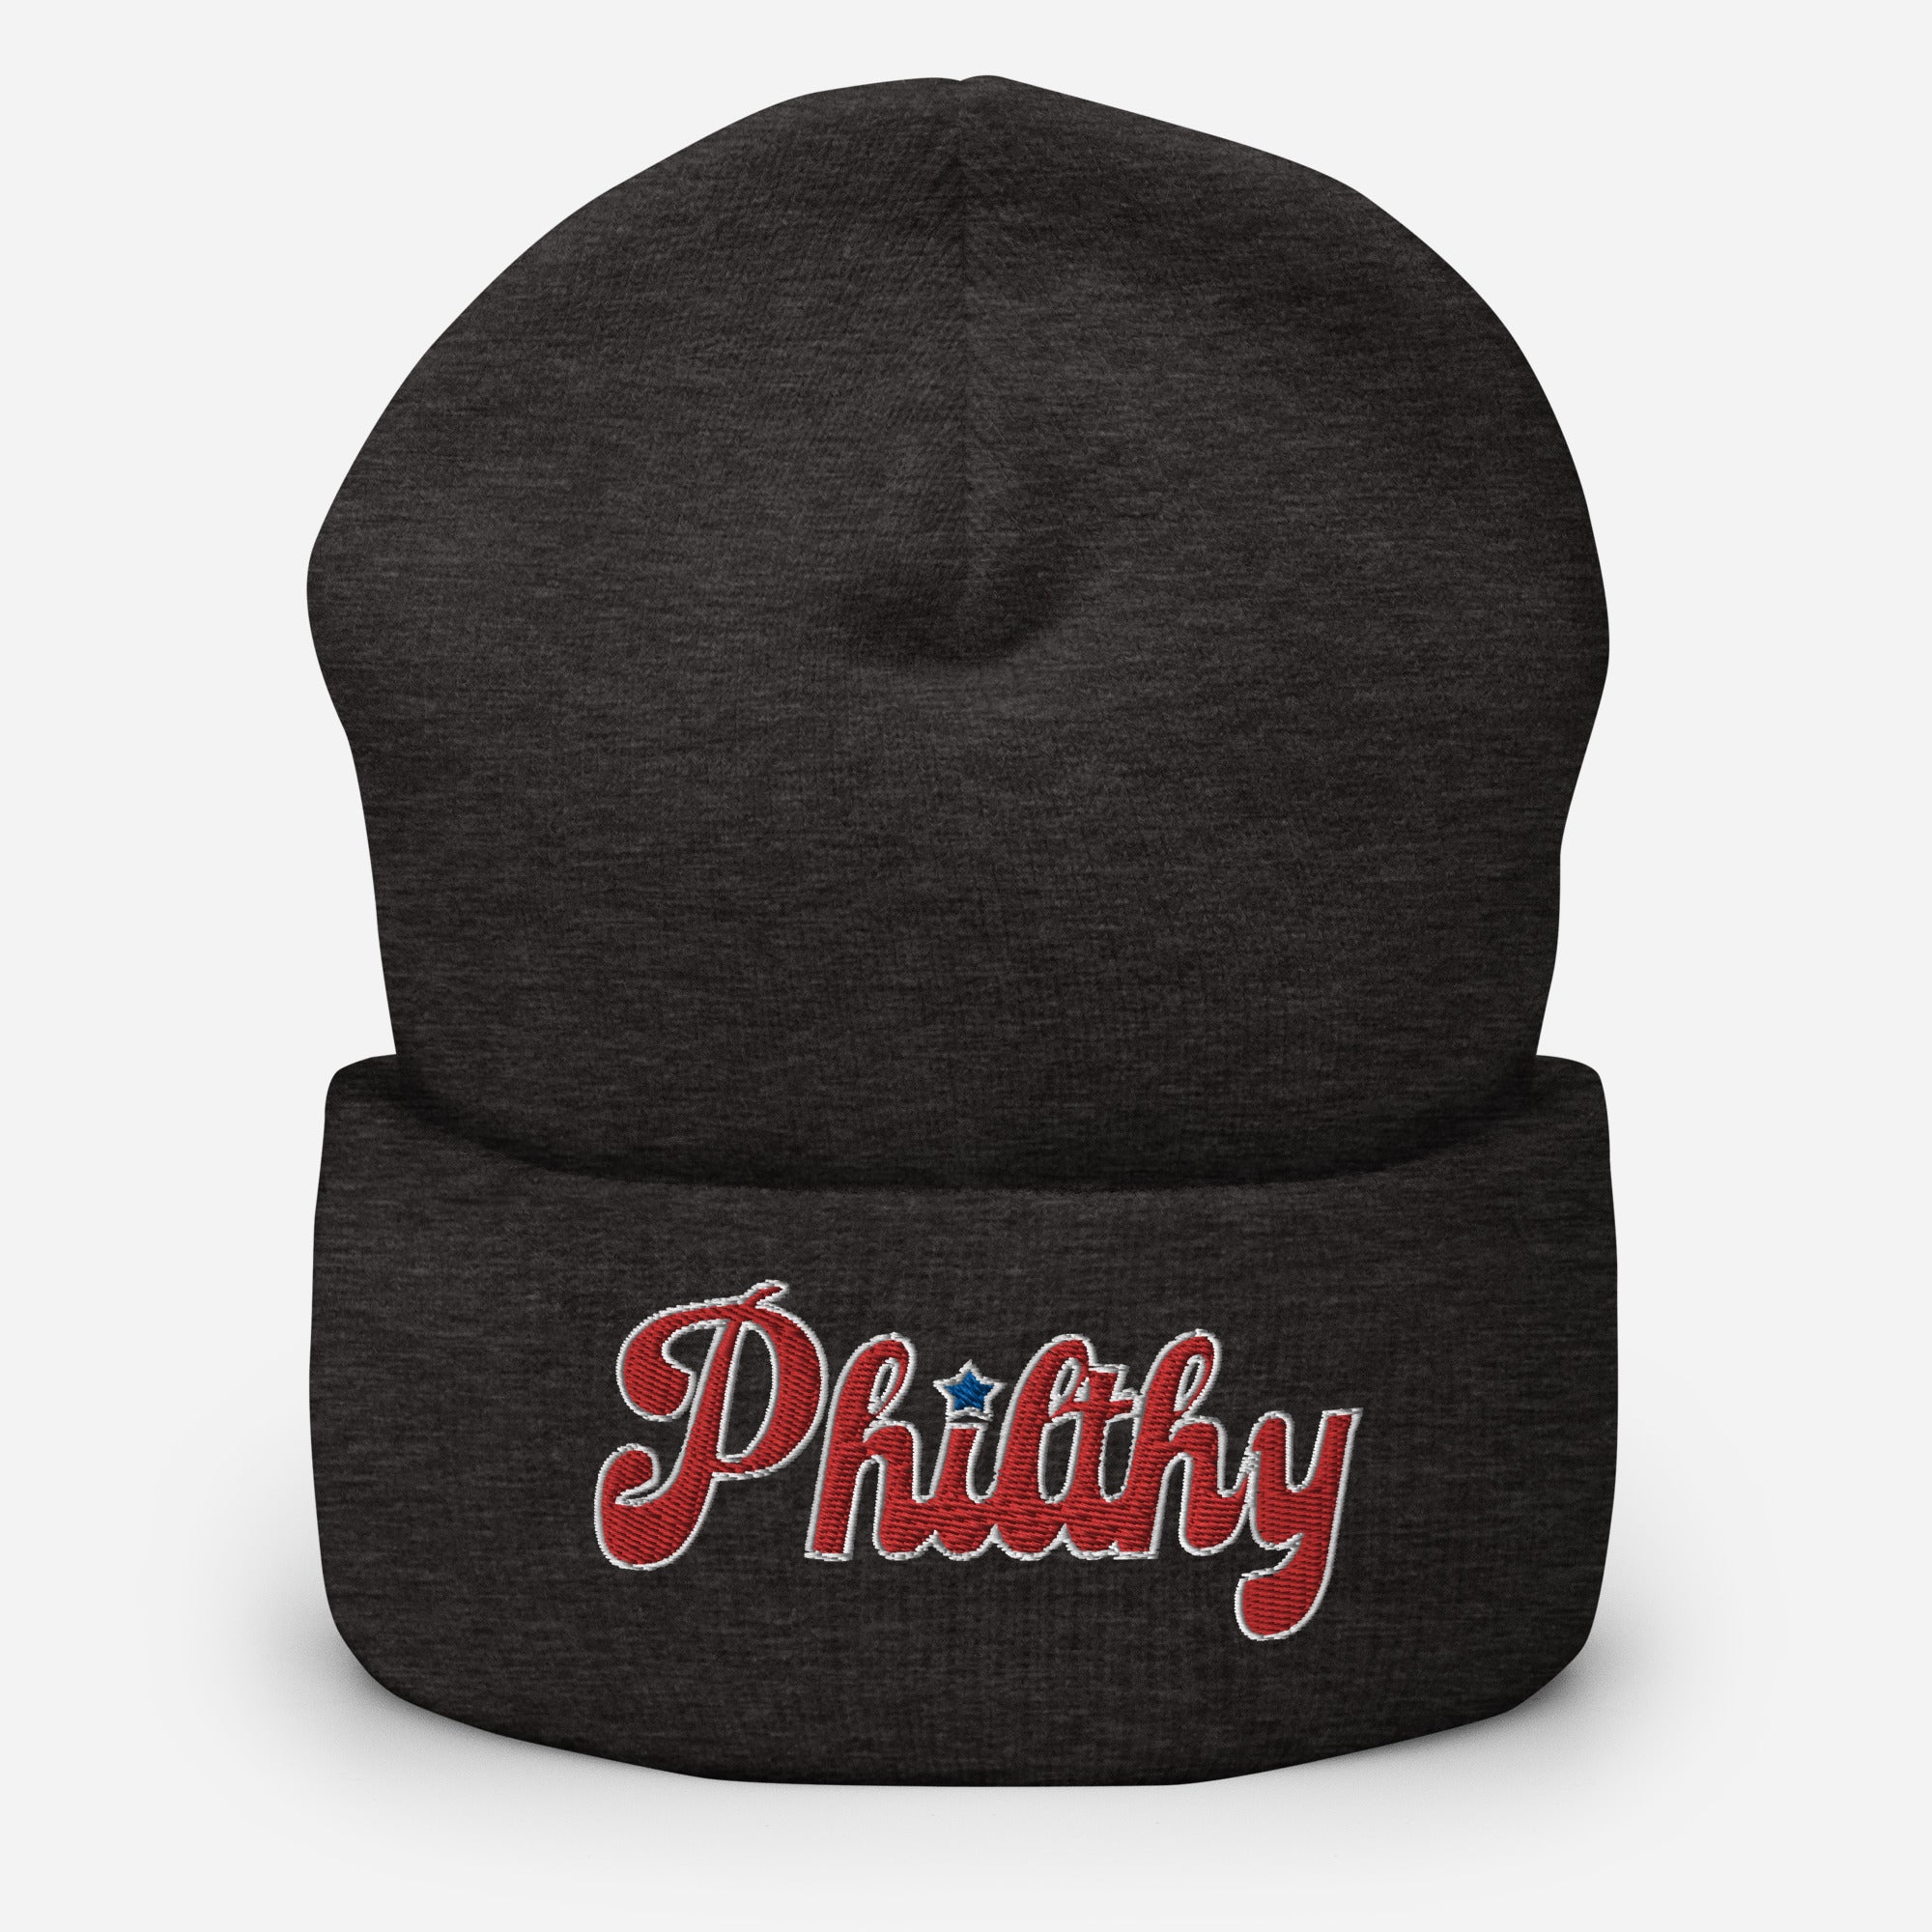 "Philthy" Knit Hat